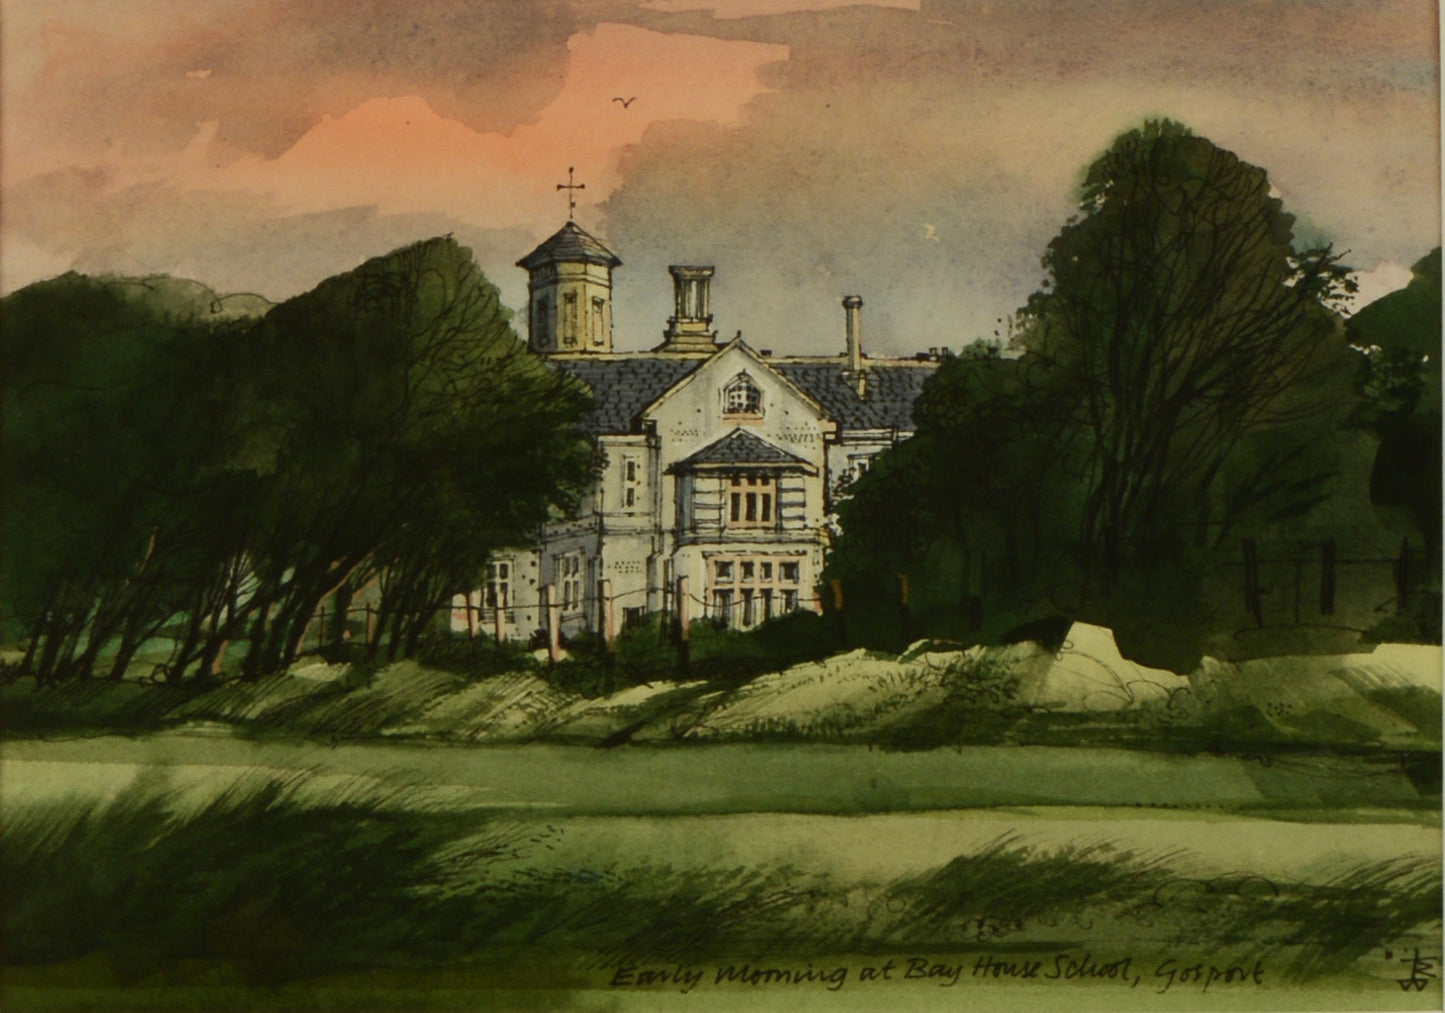 Early Morning at Bay House School, Gosport - watercolour by Richard Bradley